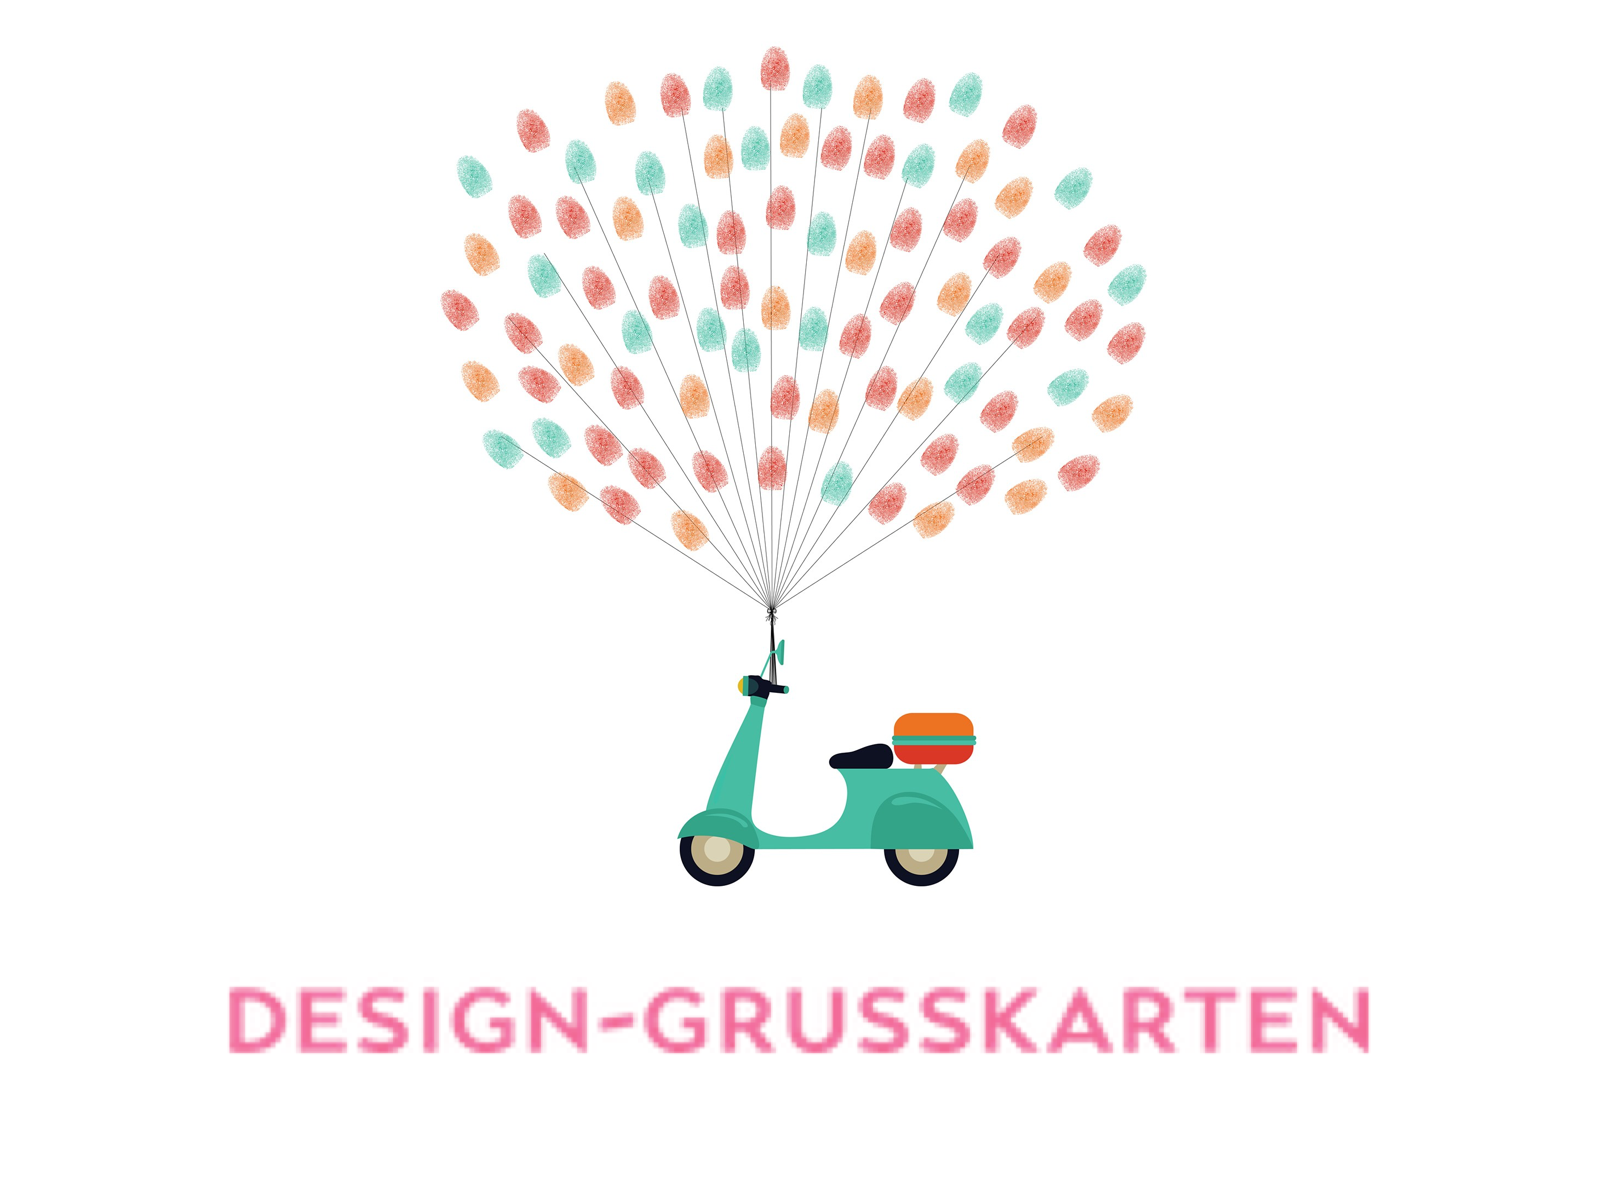 Design-Grusskarten is Even More Personal with Recolize